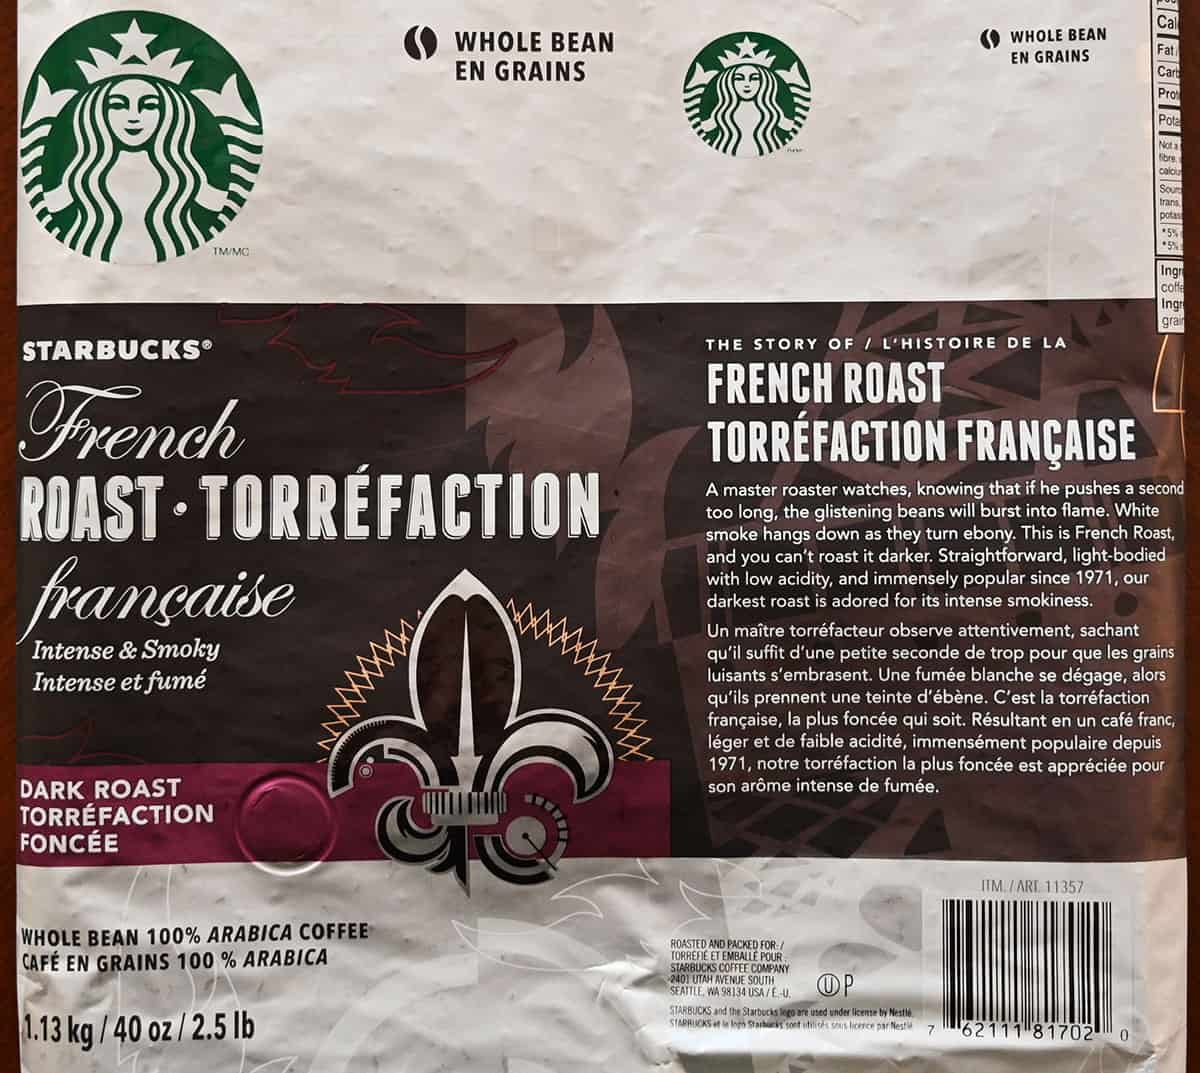 Image of the Starbucks French Roast Coffee Beans product description from the bag.